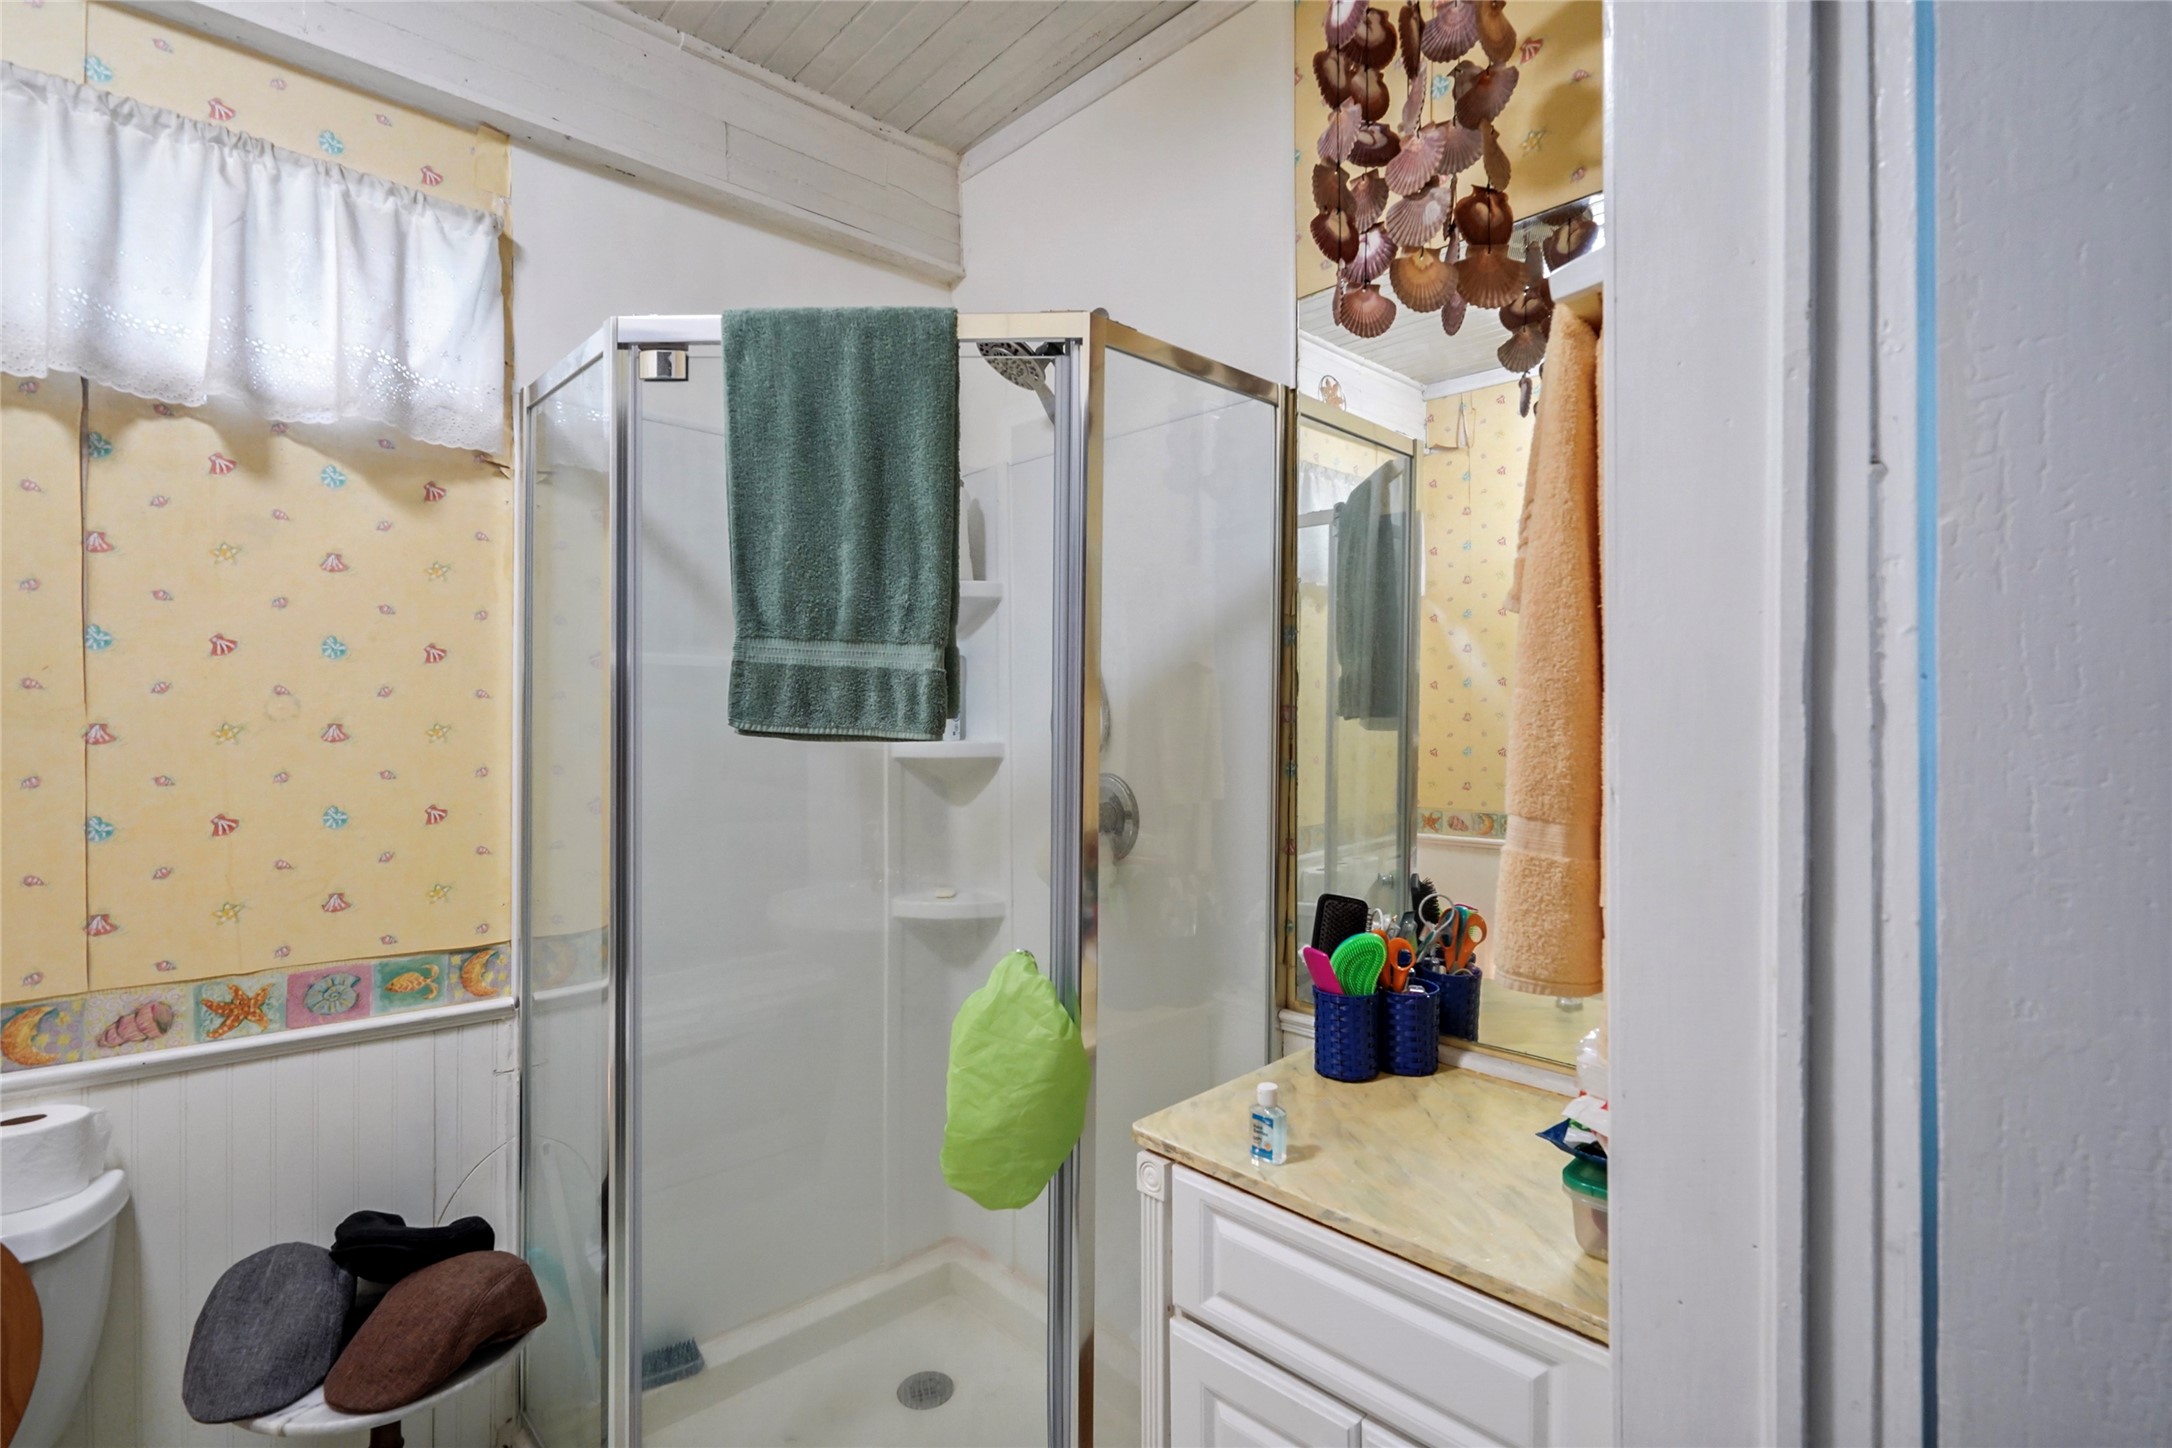 Primary bath with adjoining dressing area.